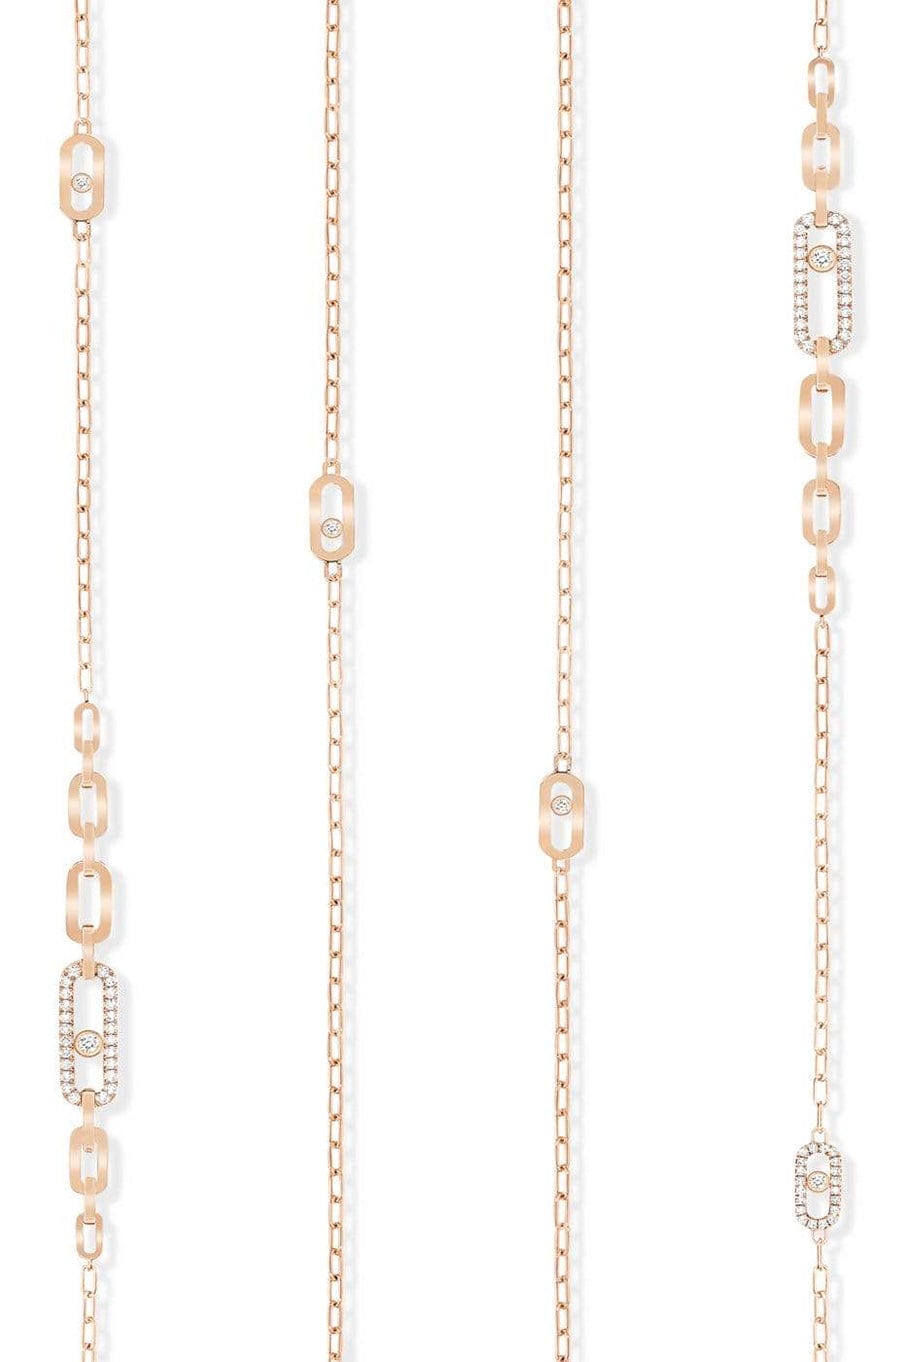 MESSIKA-Move Uno Long Necklace-ROSE GOLD